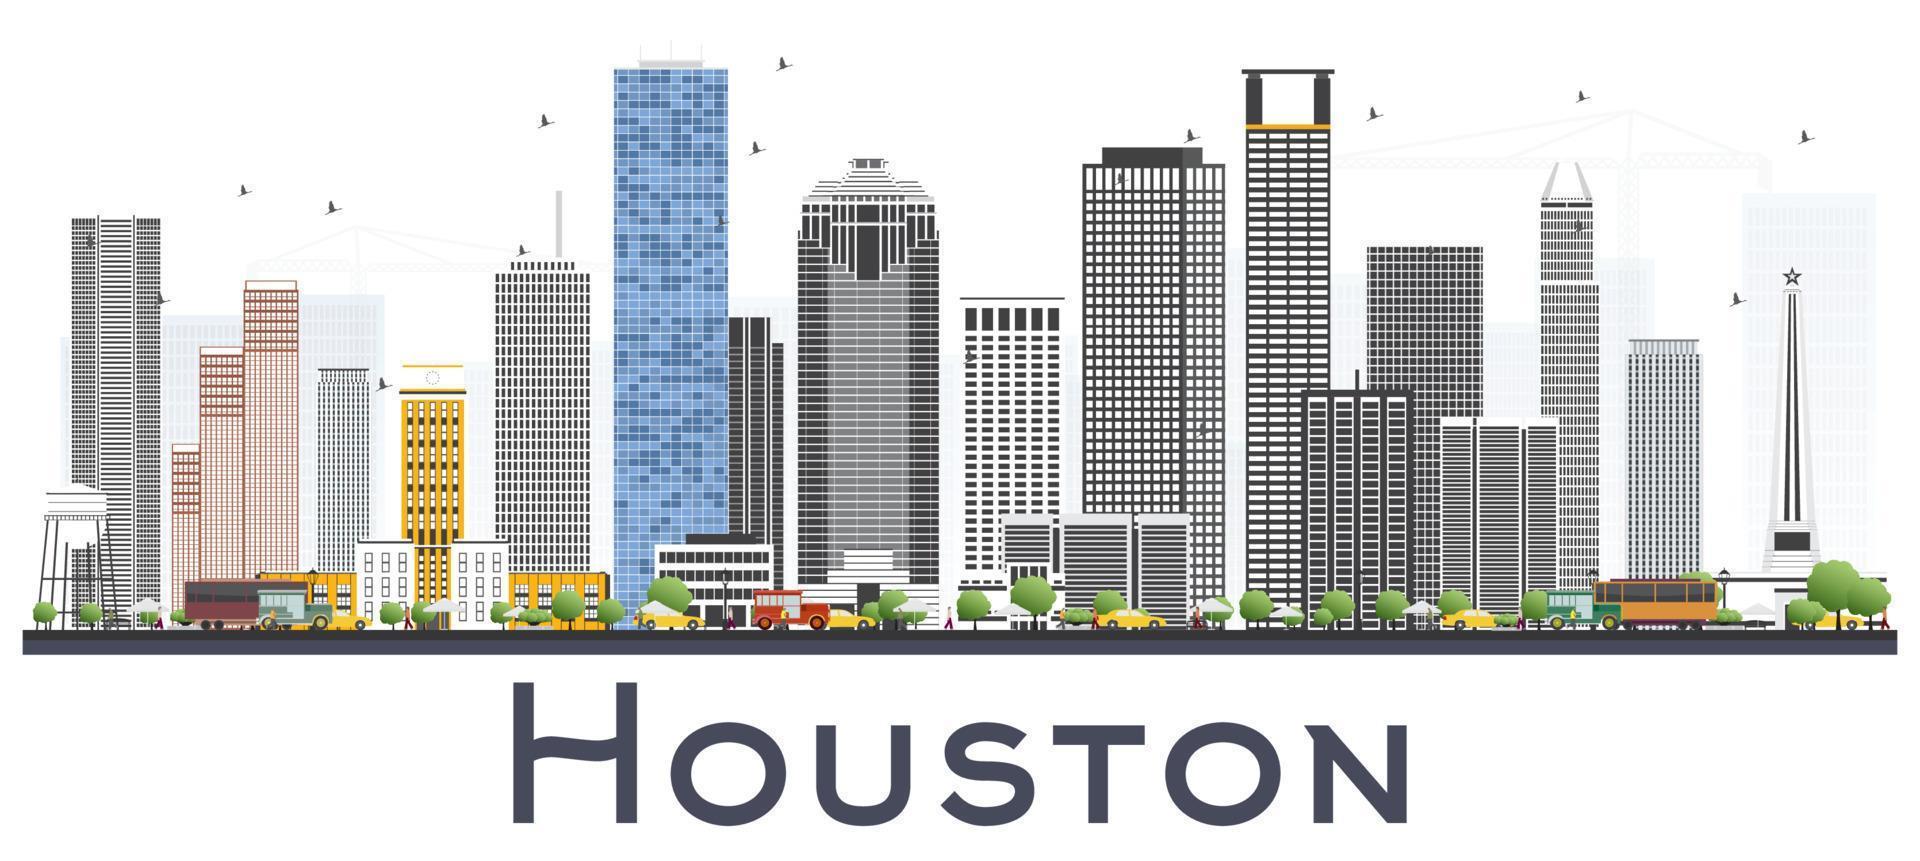 Houston Skyline USA City with Color Buildings Isolated on White Background. vector